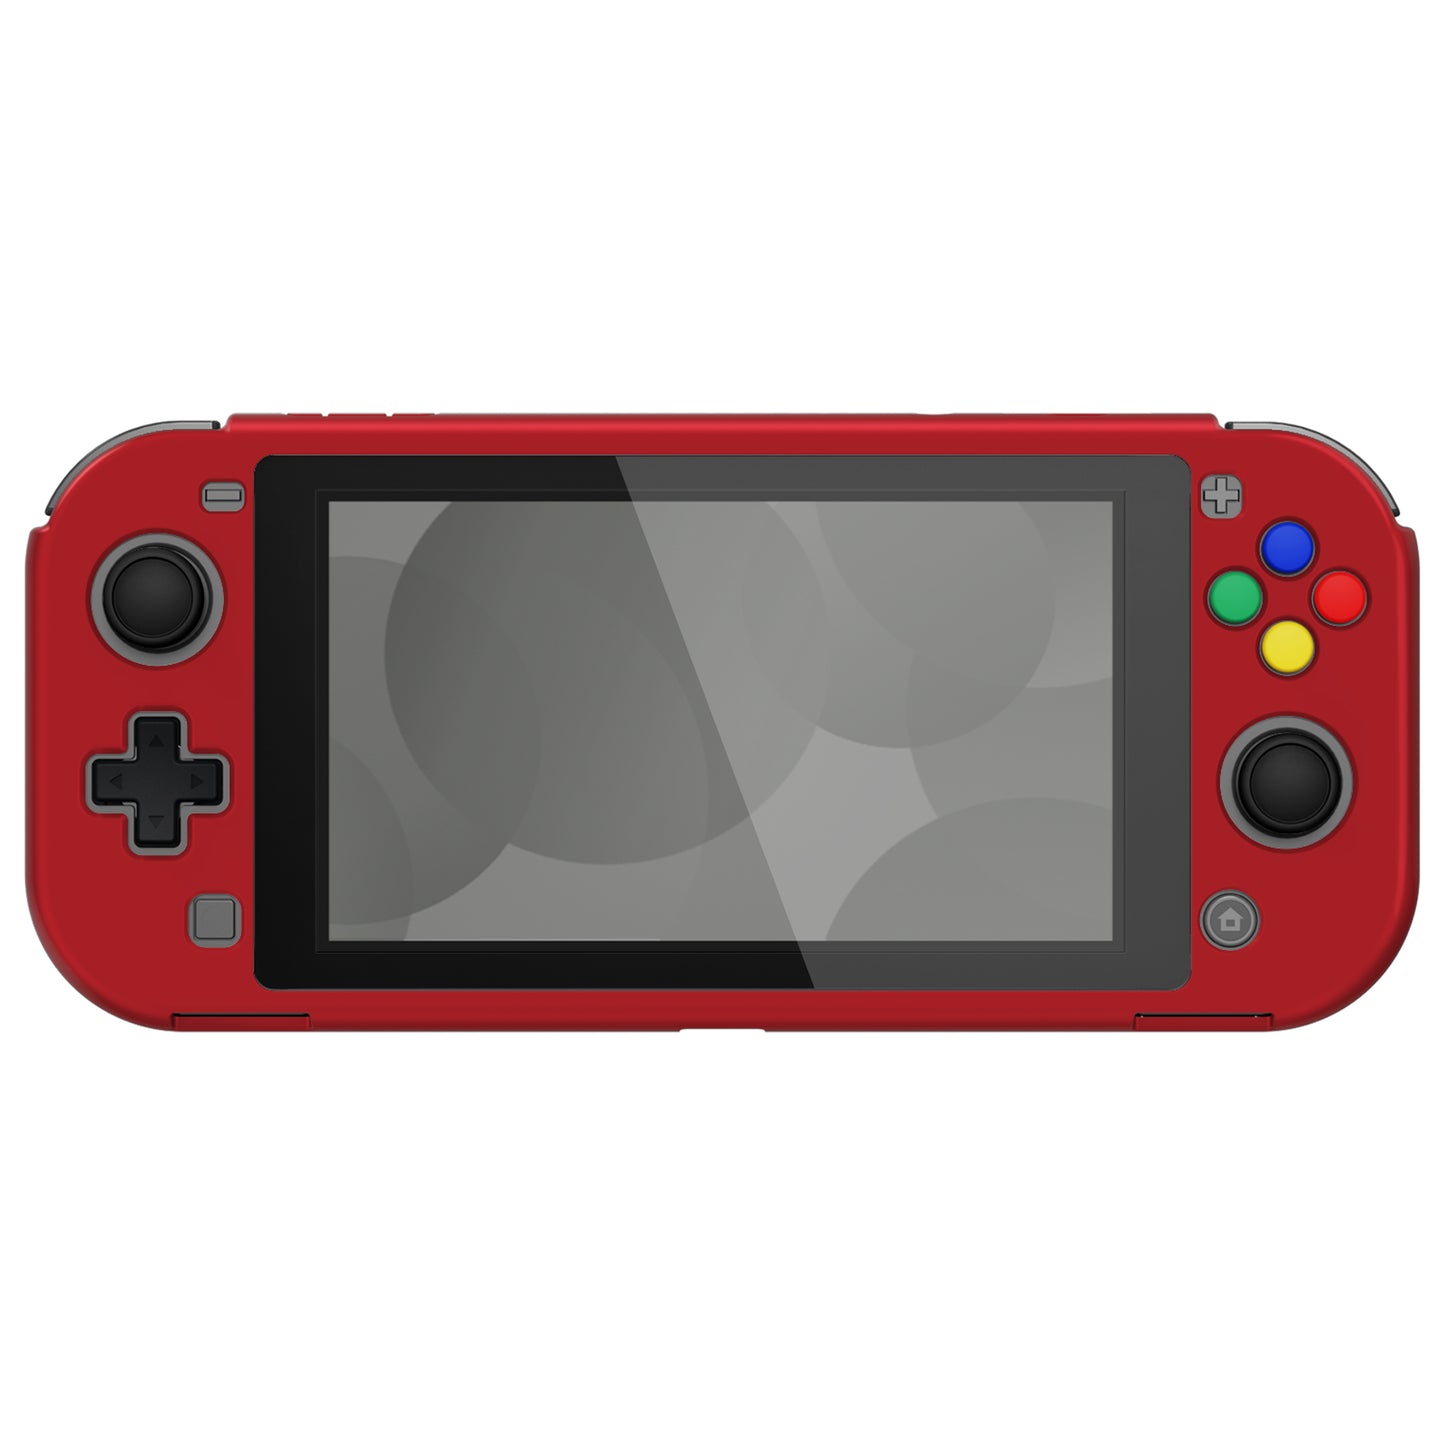 PlayVital Customized Protective Grip Case for Nintendo Switch Lite, Scarlet Red Hard Cover Protector for Nintendo Switch Lite - 1 x Black Border Tempered Glass Screen Protector Included - YYNLP003 PlayVital